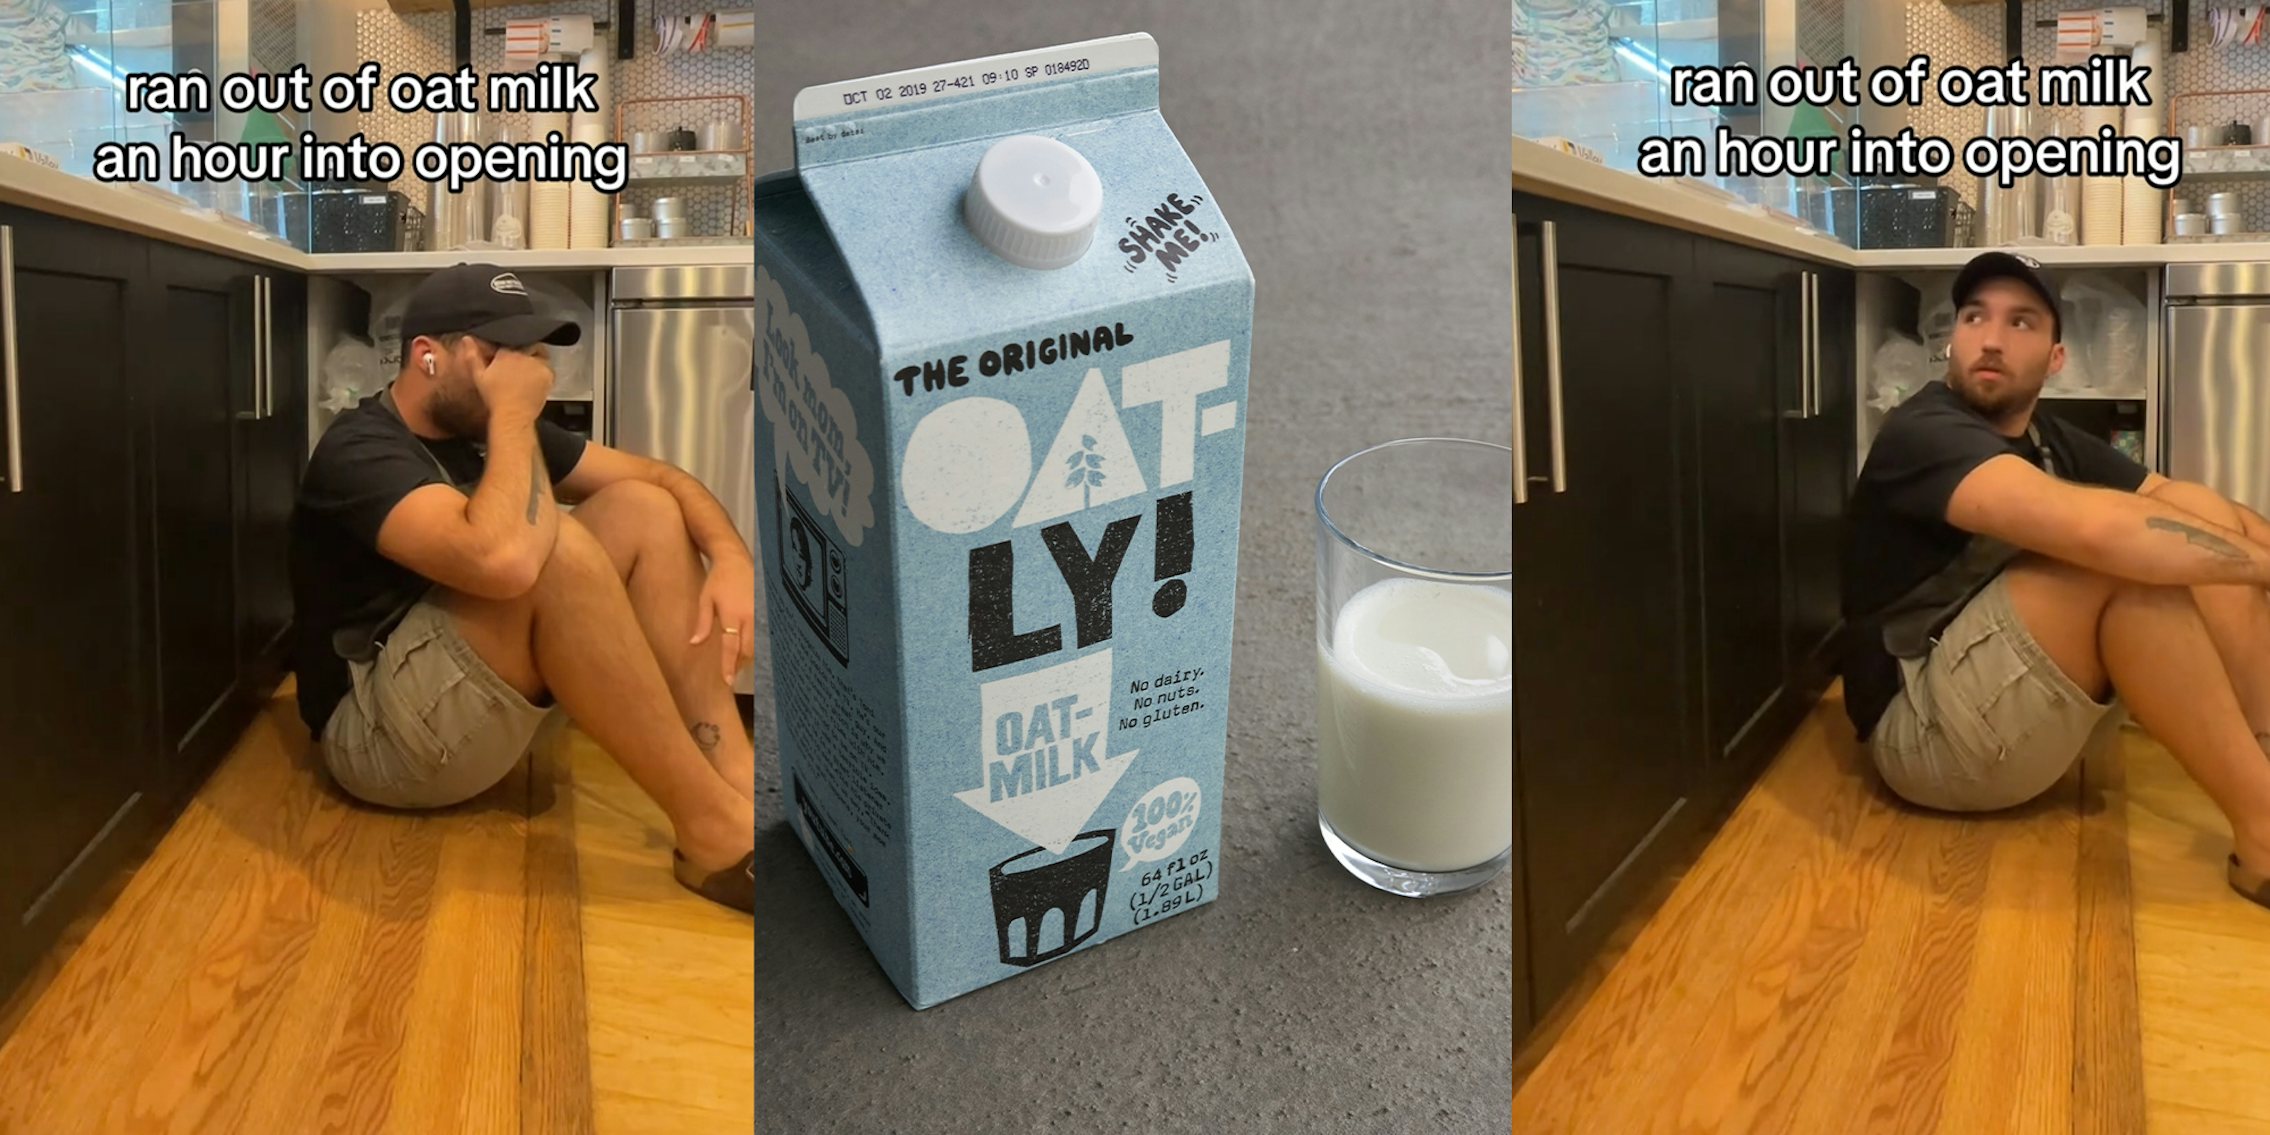 Barista runs out of oat milk one hour into shift